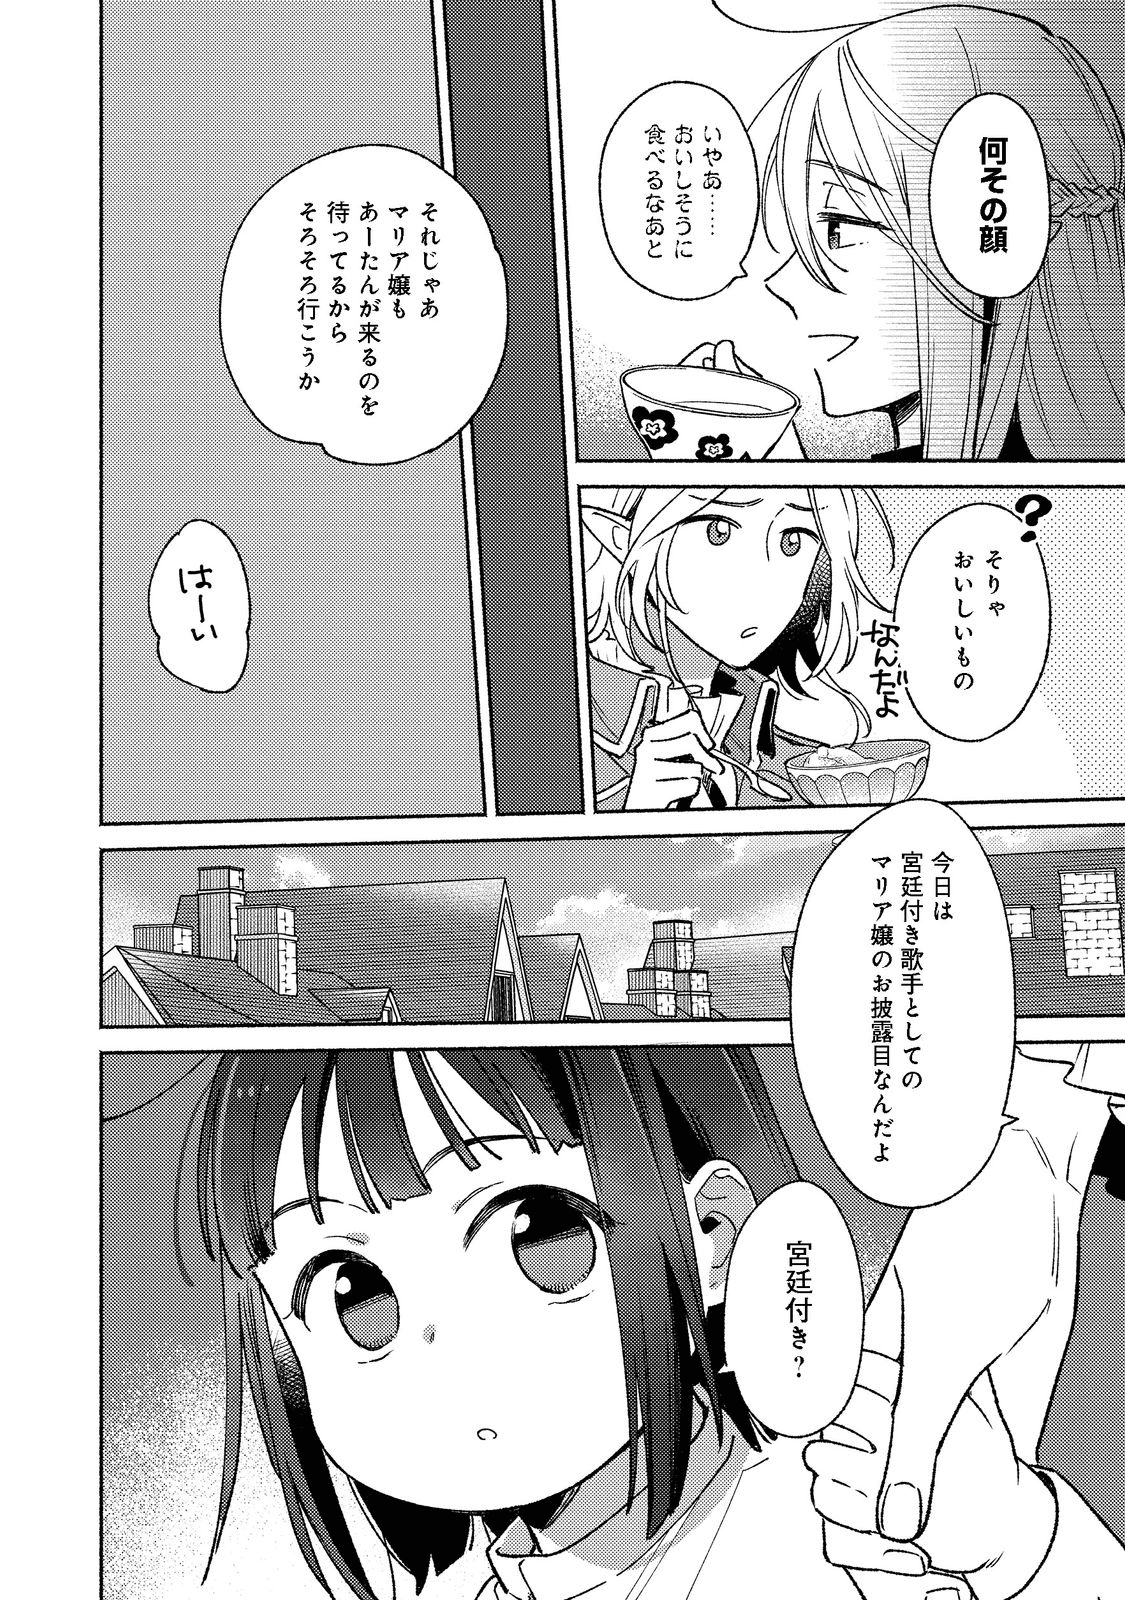 I’m the White Pig Nobleman 第15.1話 - Page 4